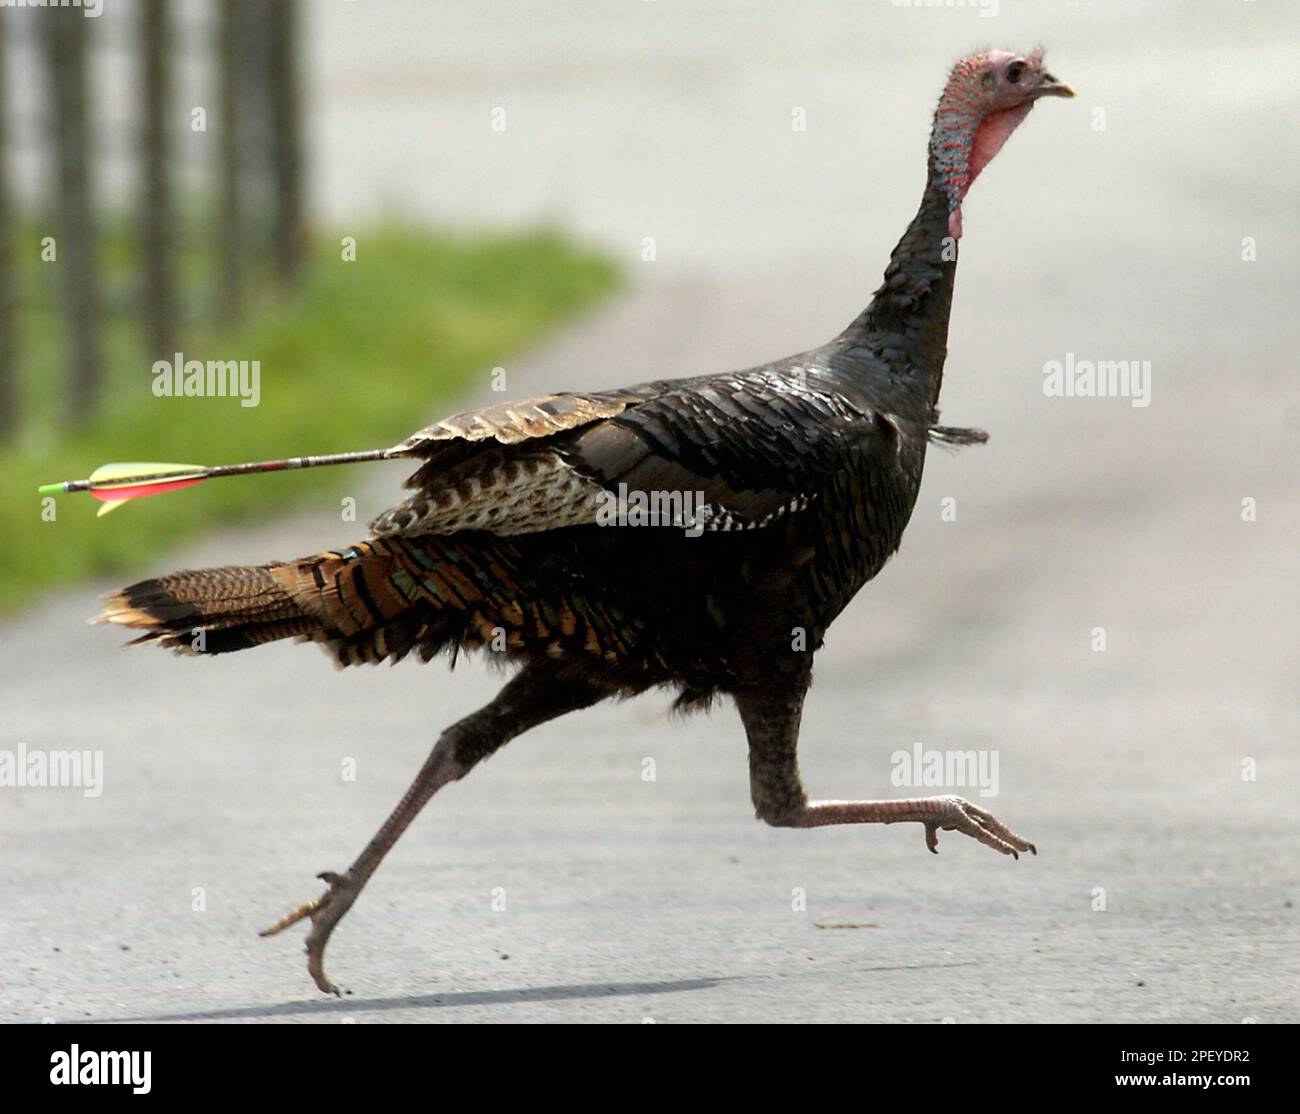 An arrow to the chest? This wild turkey is unruffled, California